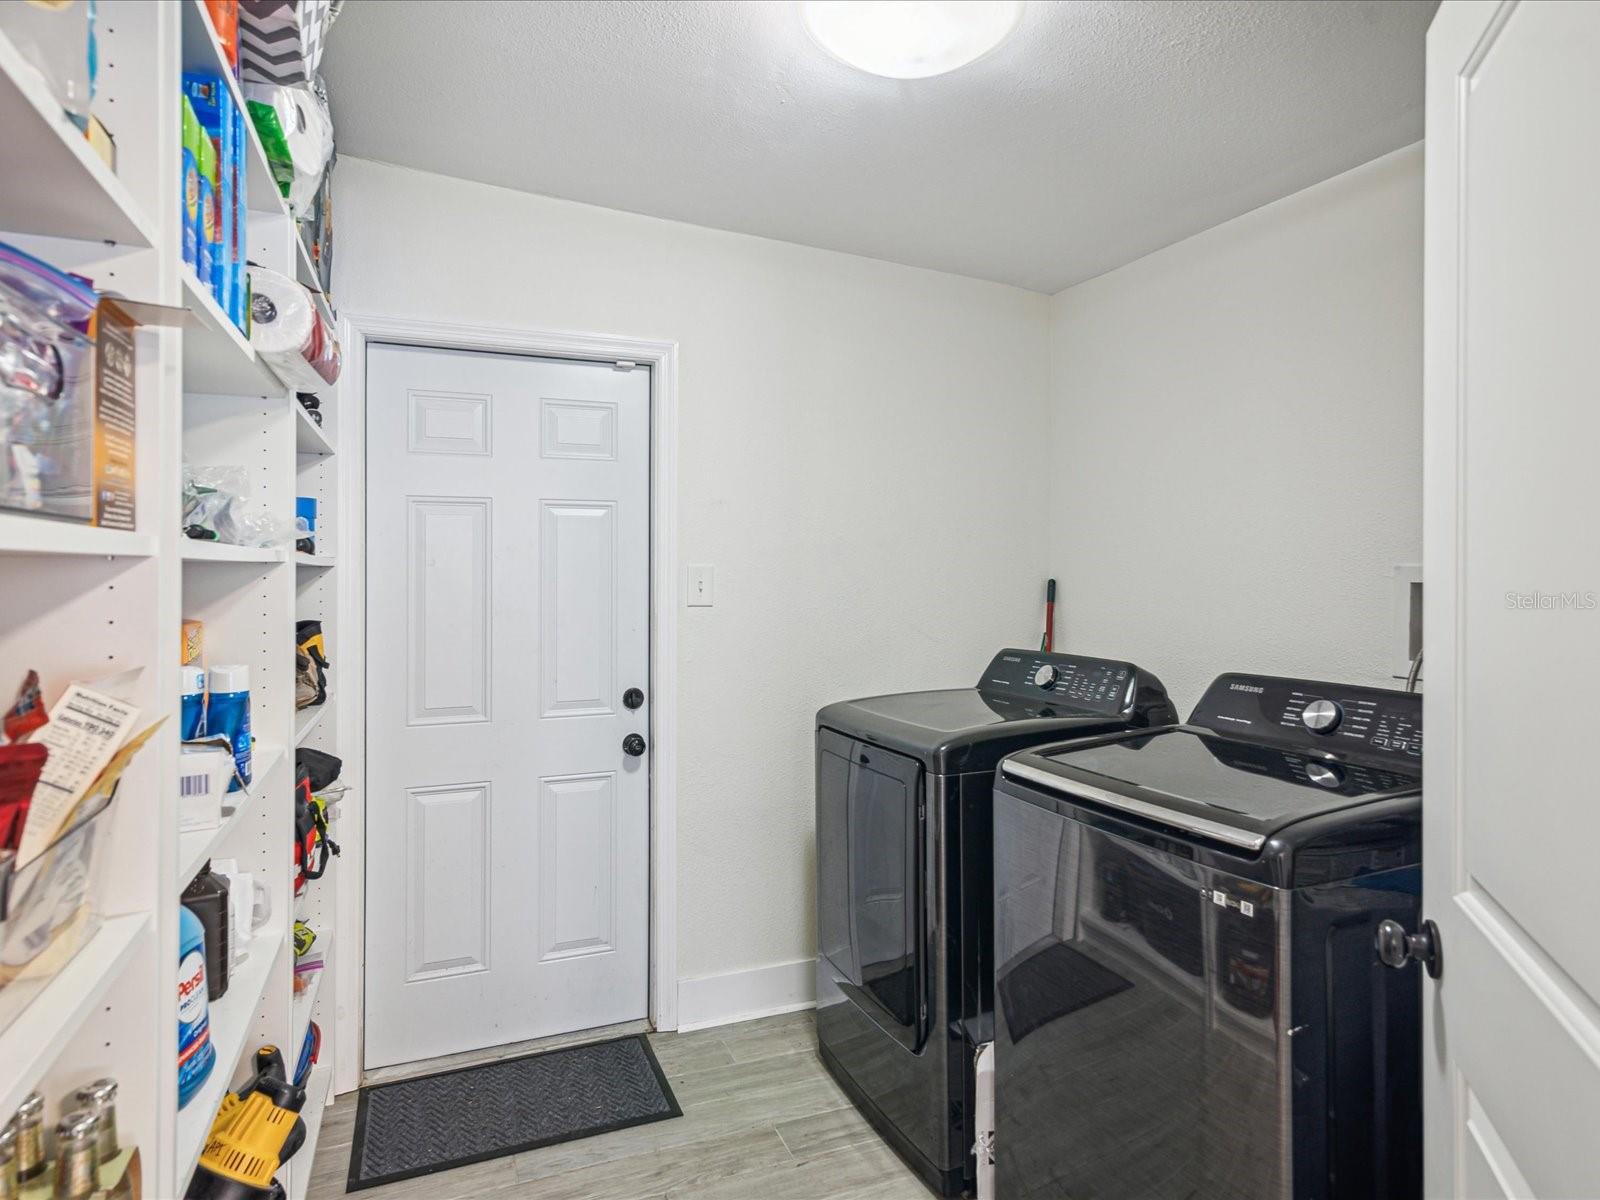 Pantry/Laundry Room